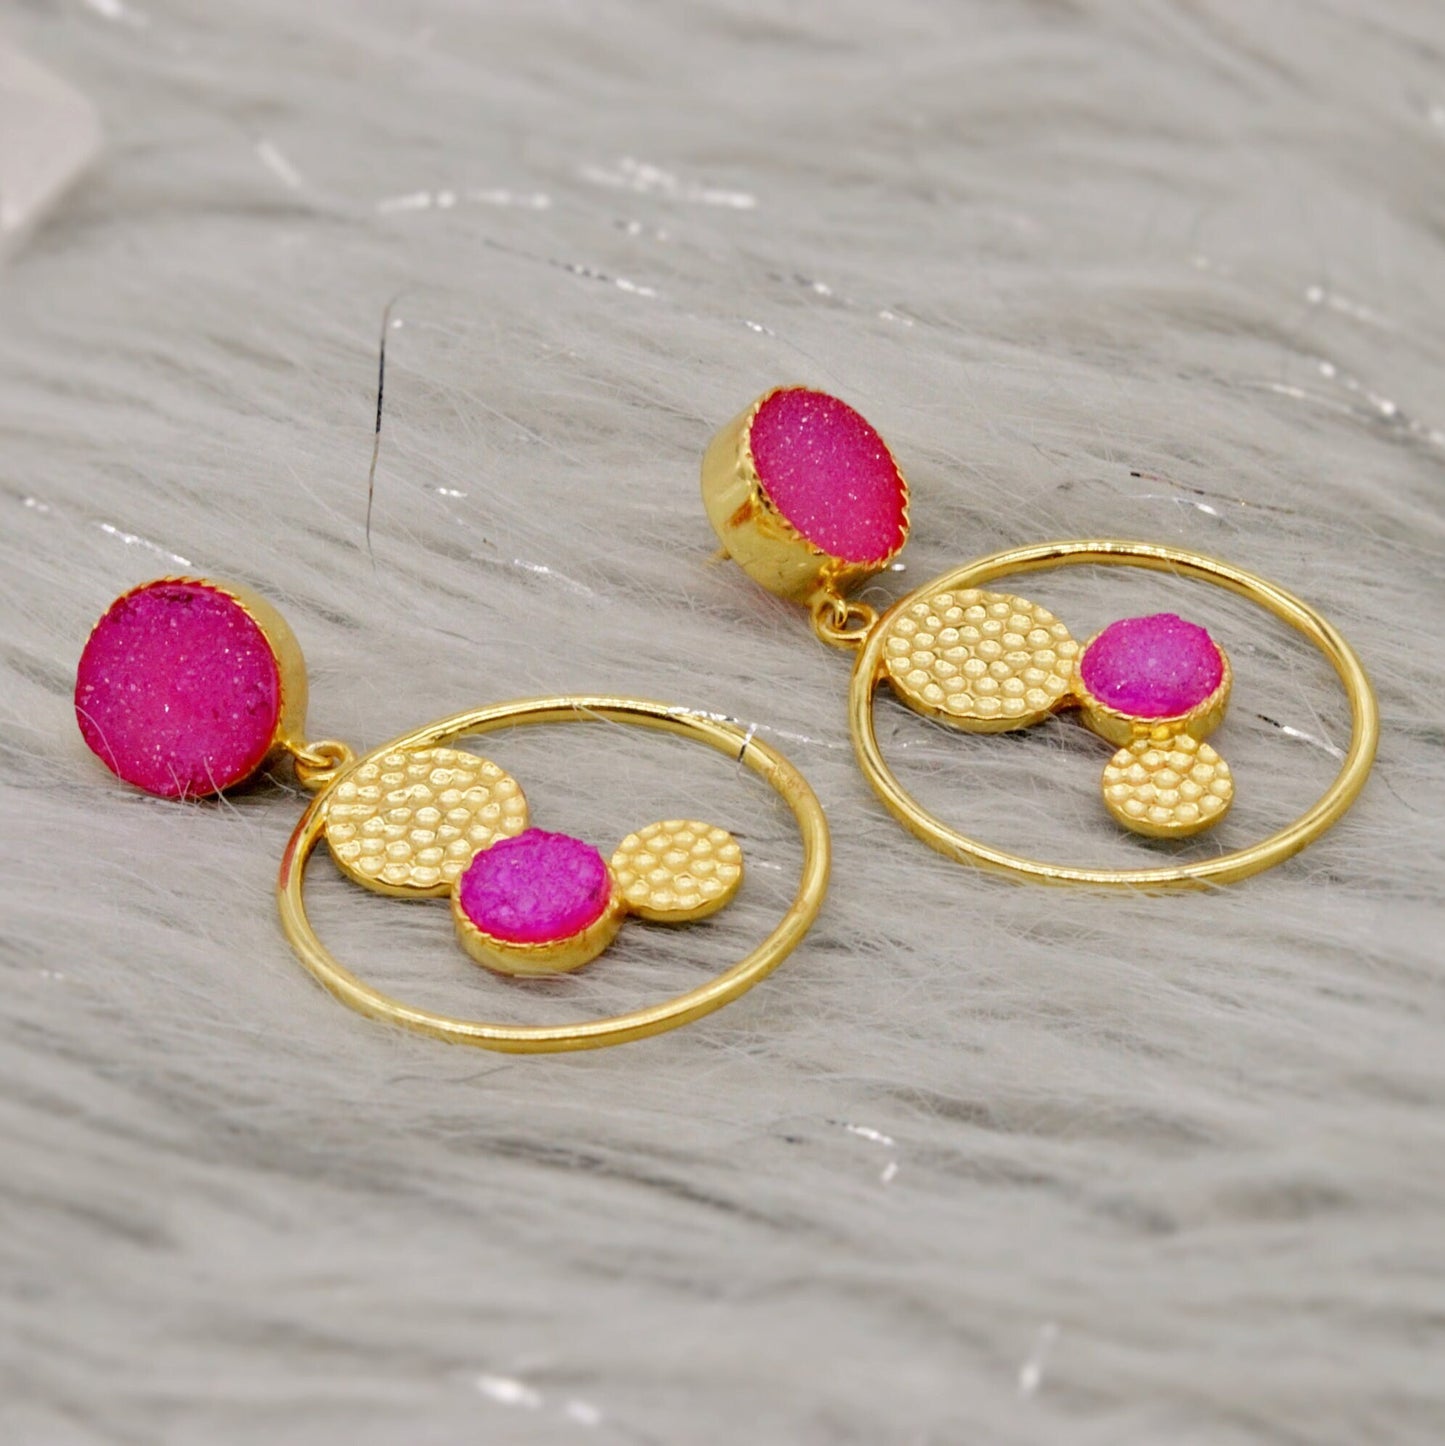 Pink Druzy Agate Gold Earrings, Gold Plated Sterling Silver Earrings, Statement Jhumka Earrings, Gift For Her, Birthday Gift